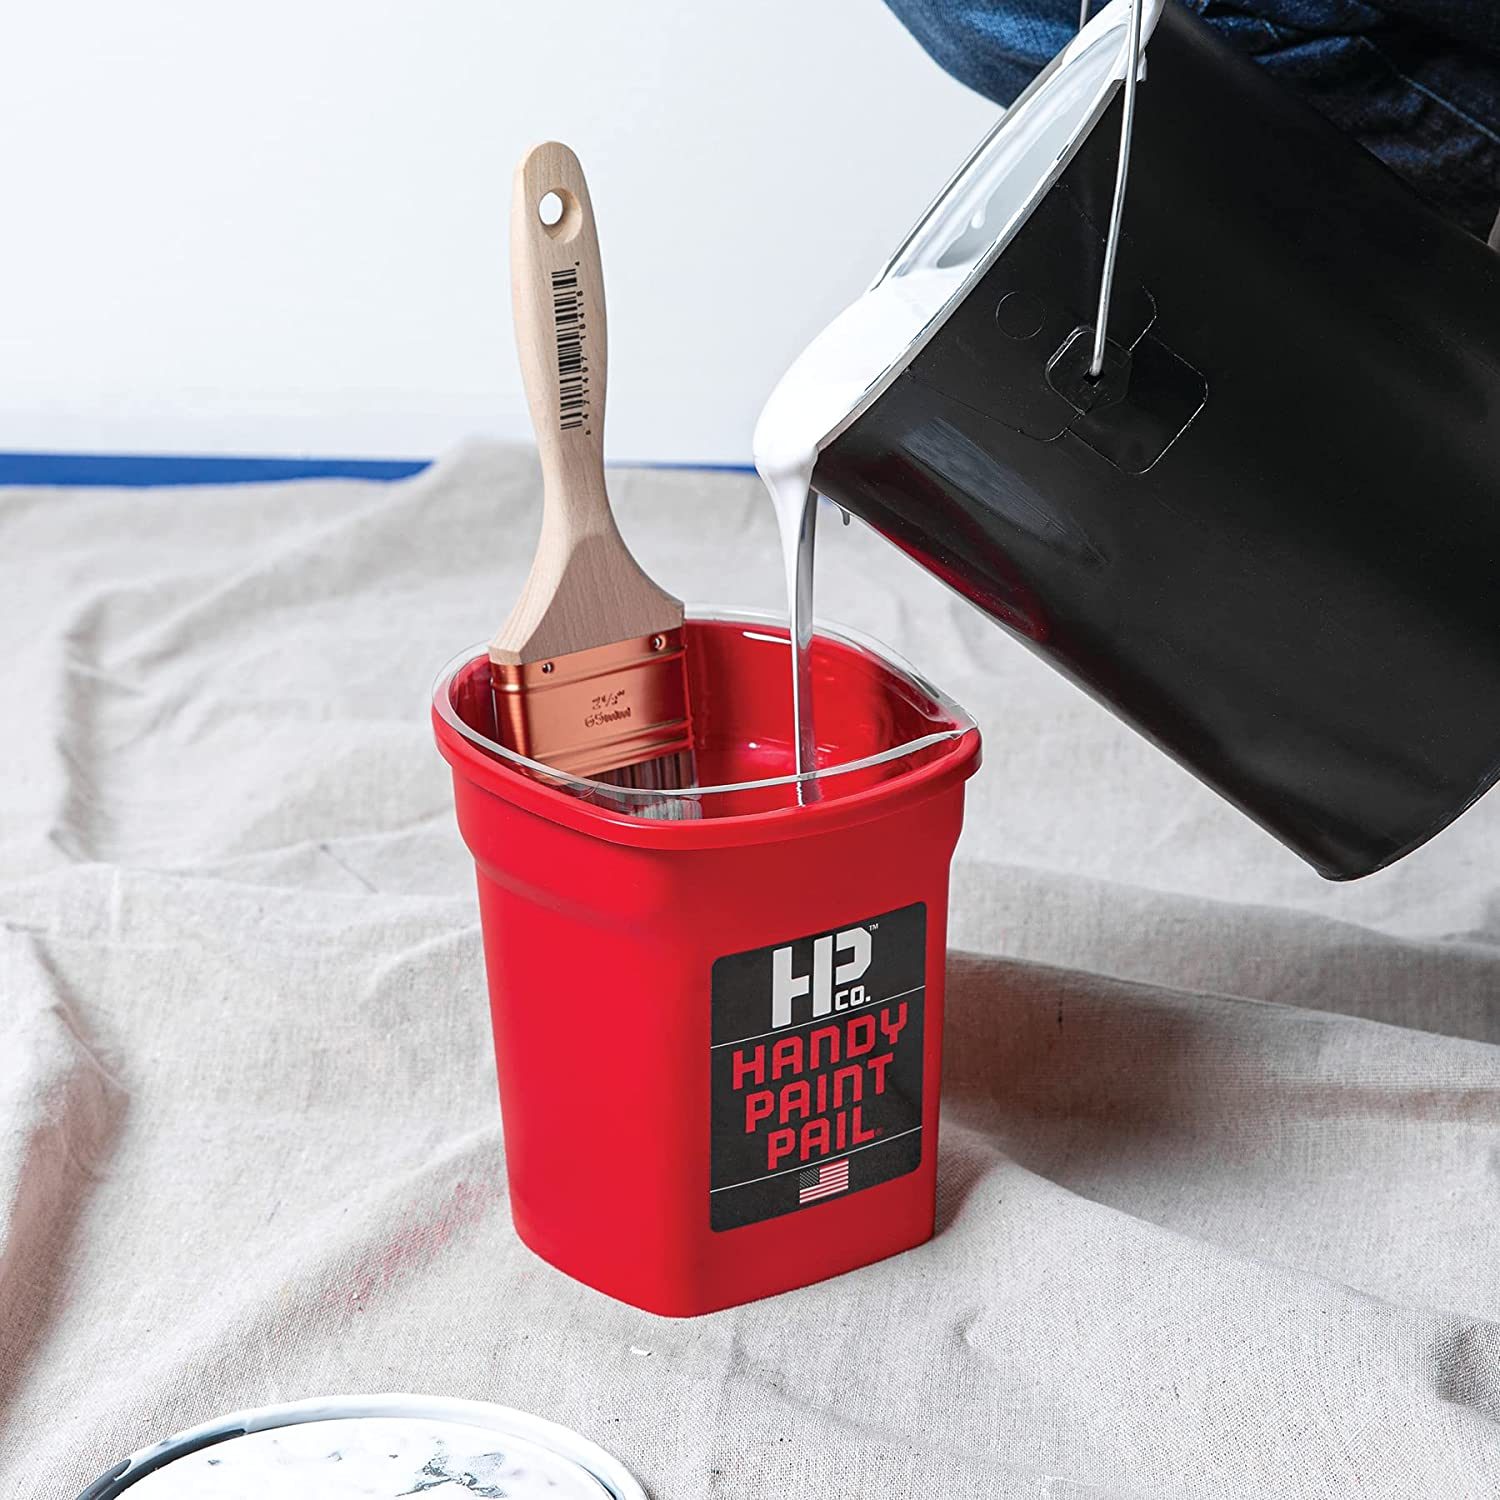 Best Paint Buckets With Handheld Options to For the Perfect Painting Job!